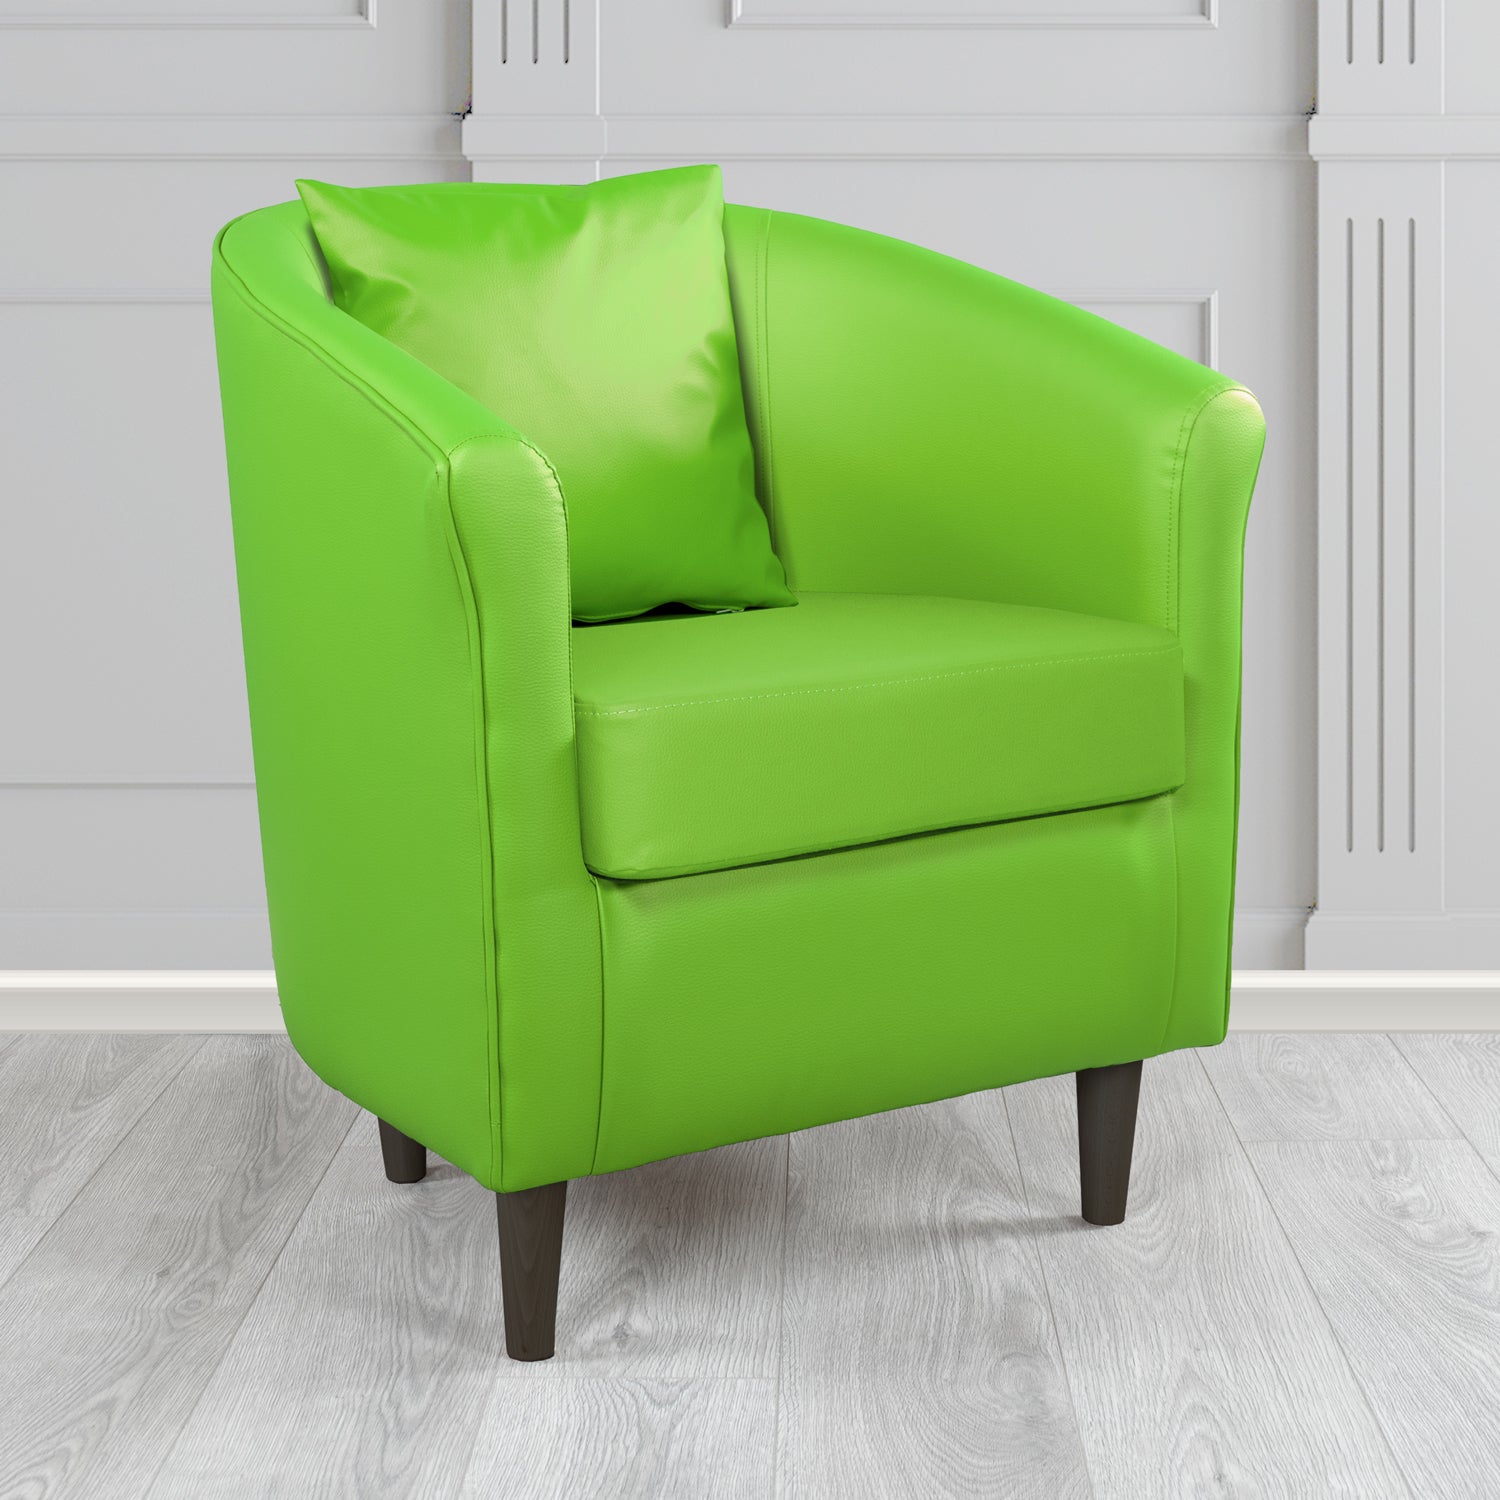 St Tropez Tub Chair with Scatter Cushion in Madrid Lime Faux Leather - The Tub Chair Shop